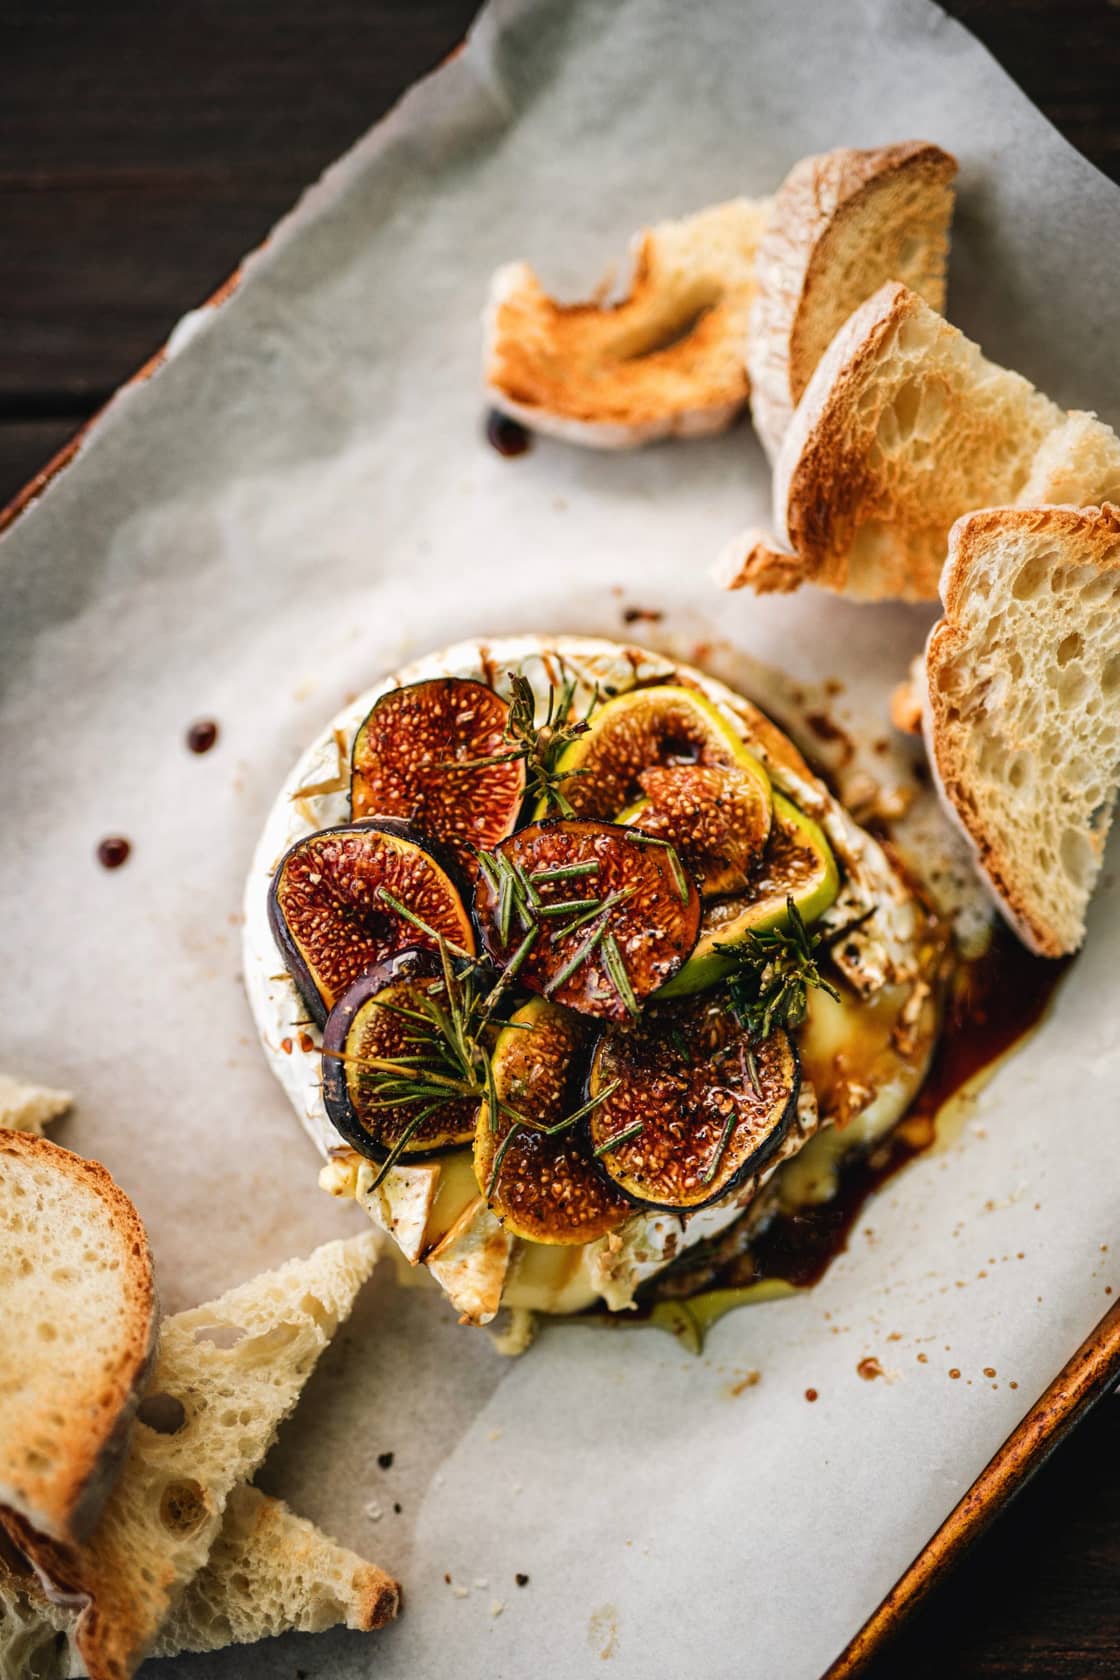 BAKED CAMEMBERT WITH FIGS AND BALSAMIC VINEGAR